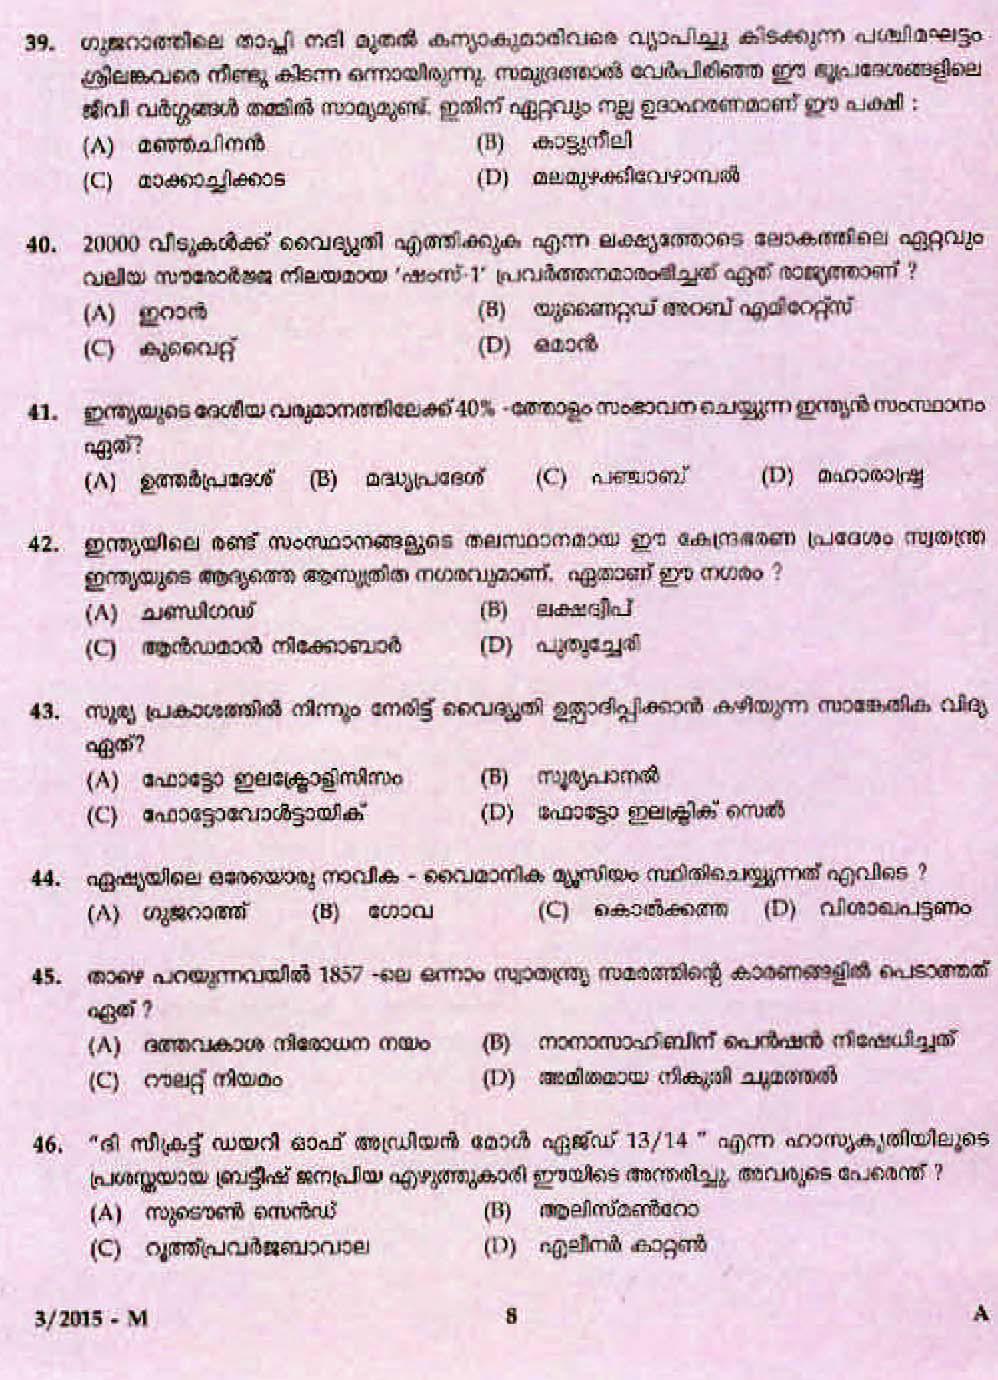 LD Clerk Thrissur District Question Paper Malayalam 2015 Paper Code 32015 M 6